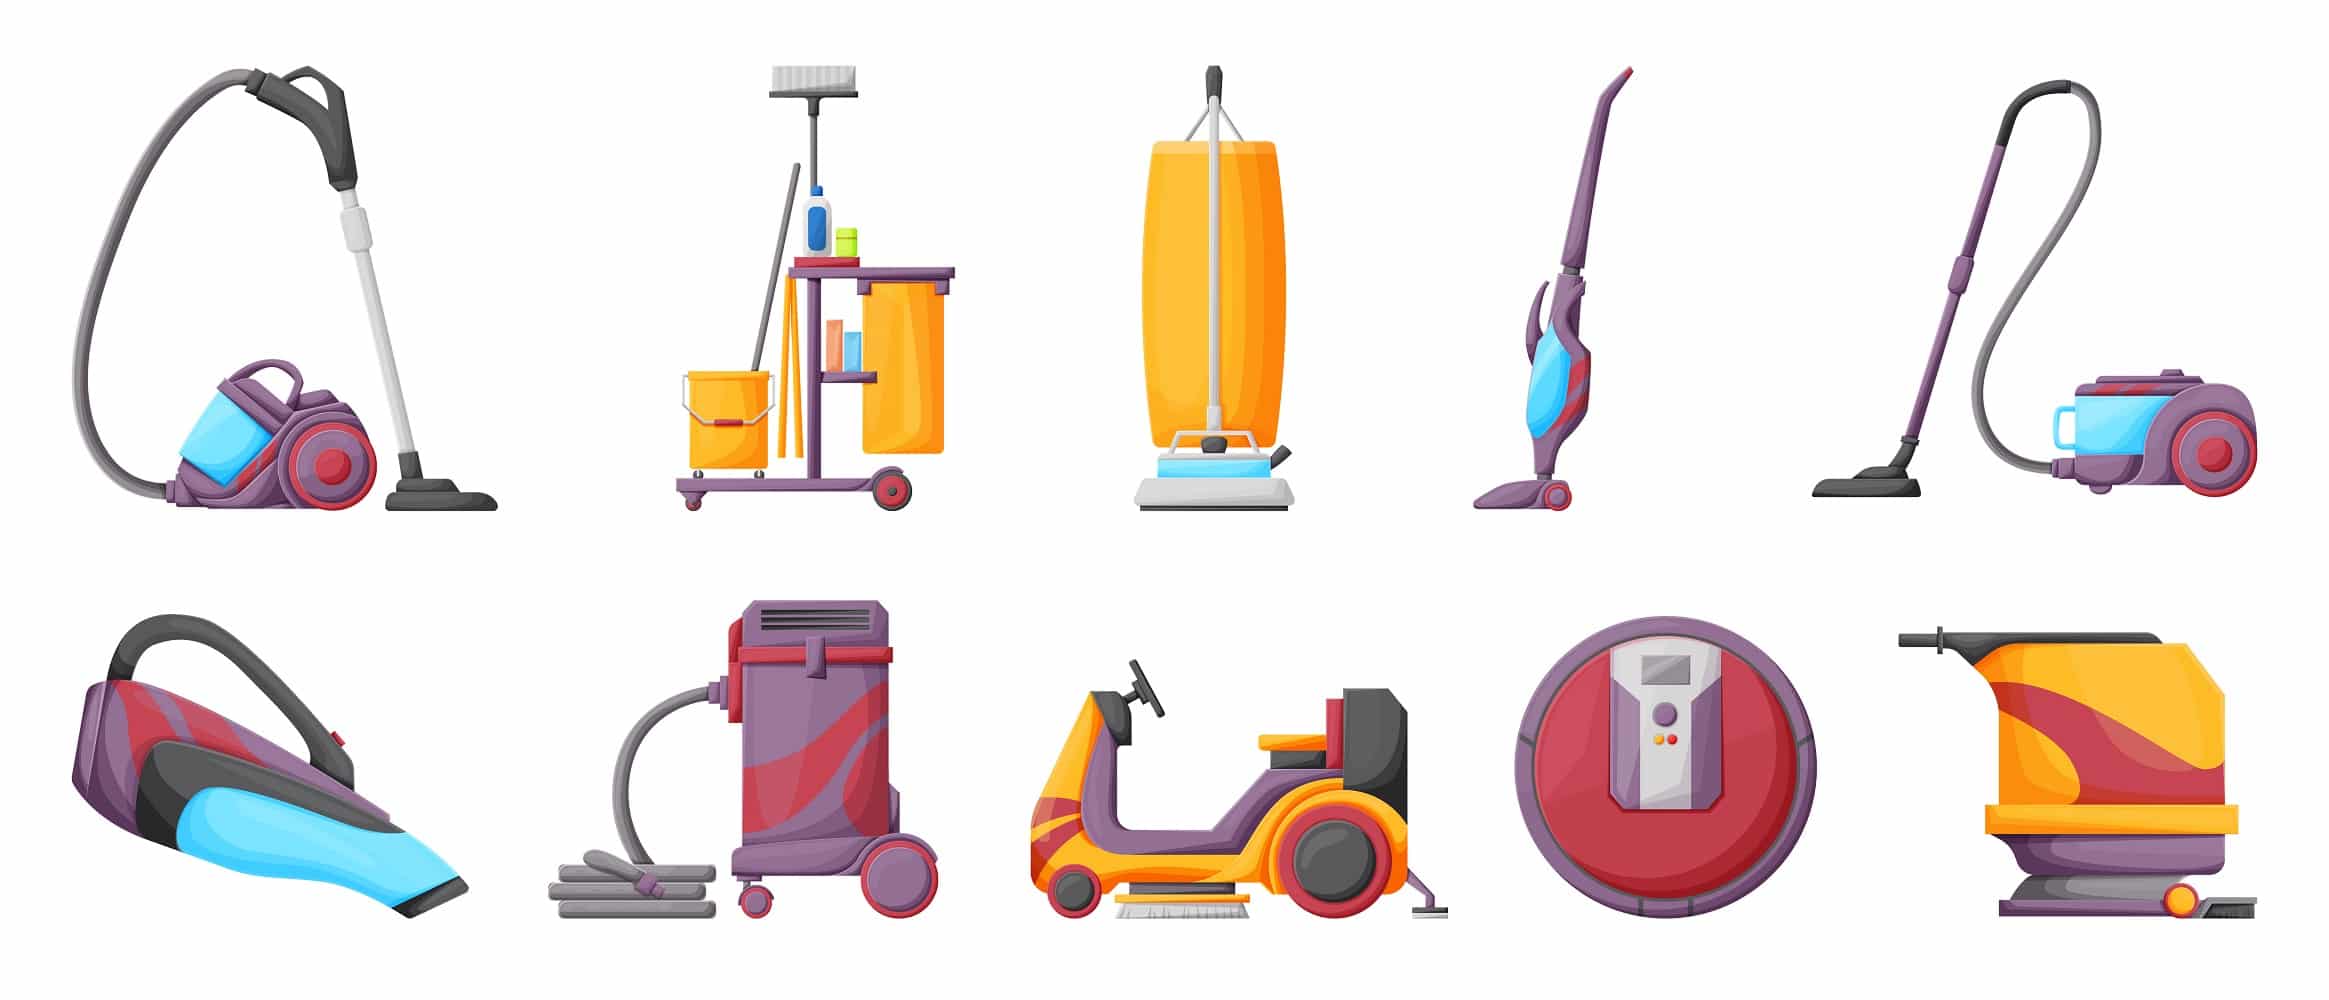 Vacuum cleaner cartoon vector illustration on white background . Set icon vacuum cleaner for cleaning .Cartoon vector icons hoover for cleaning carpet.